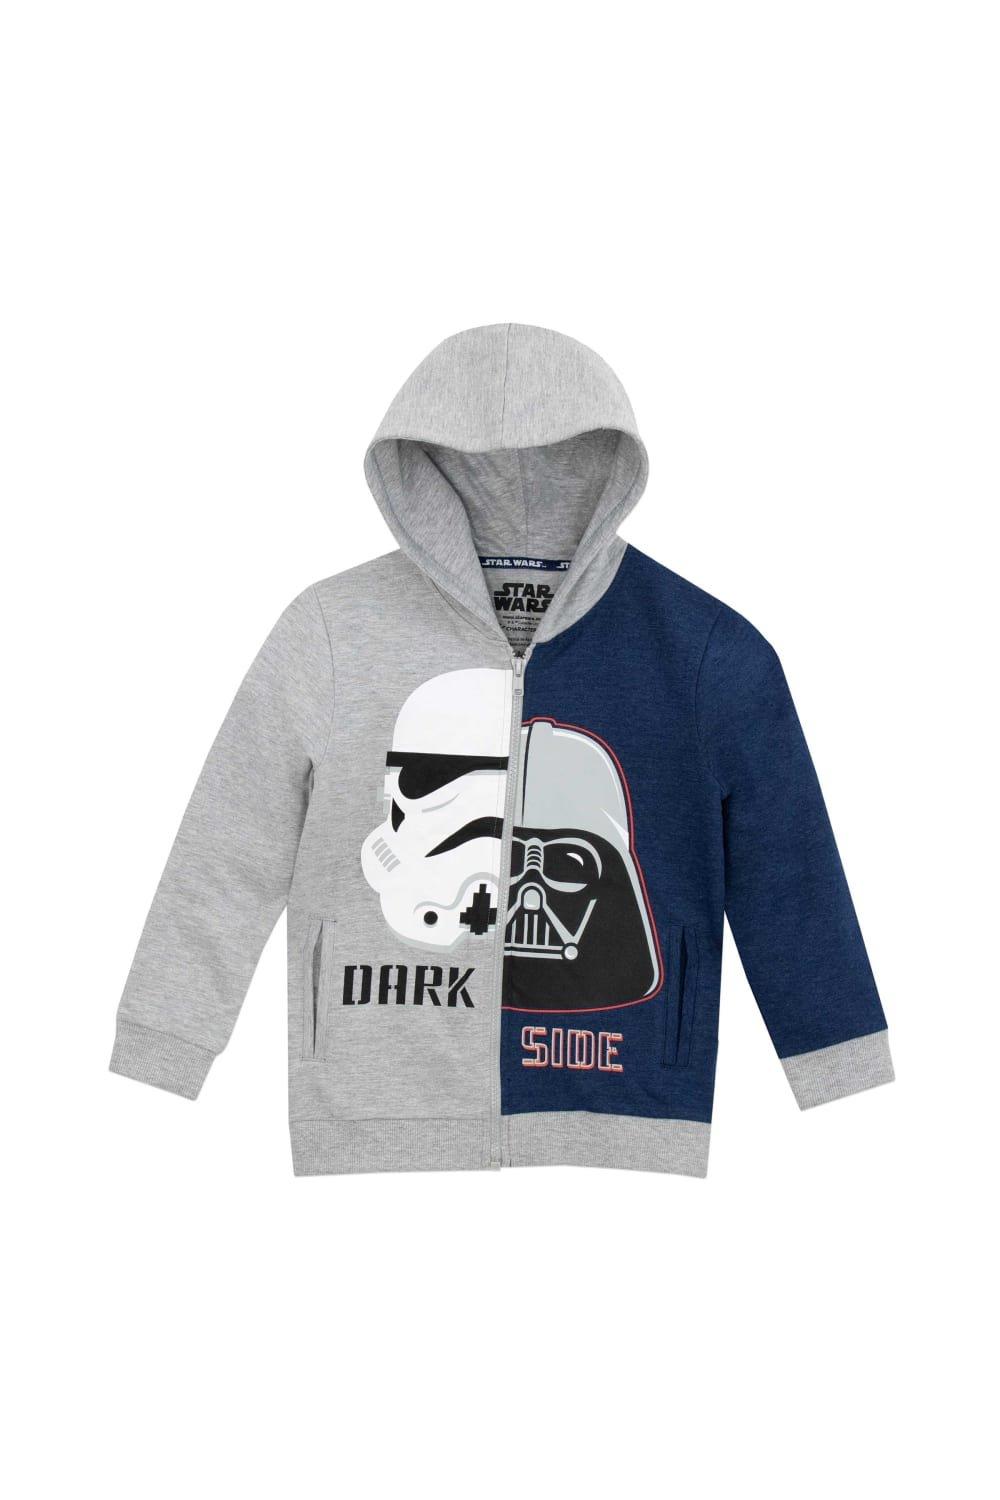 Darth Vader and Stormtrooper Zipped Hoodie